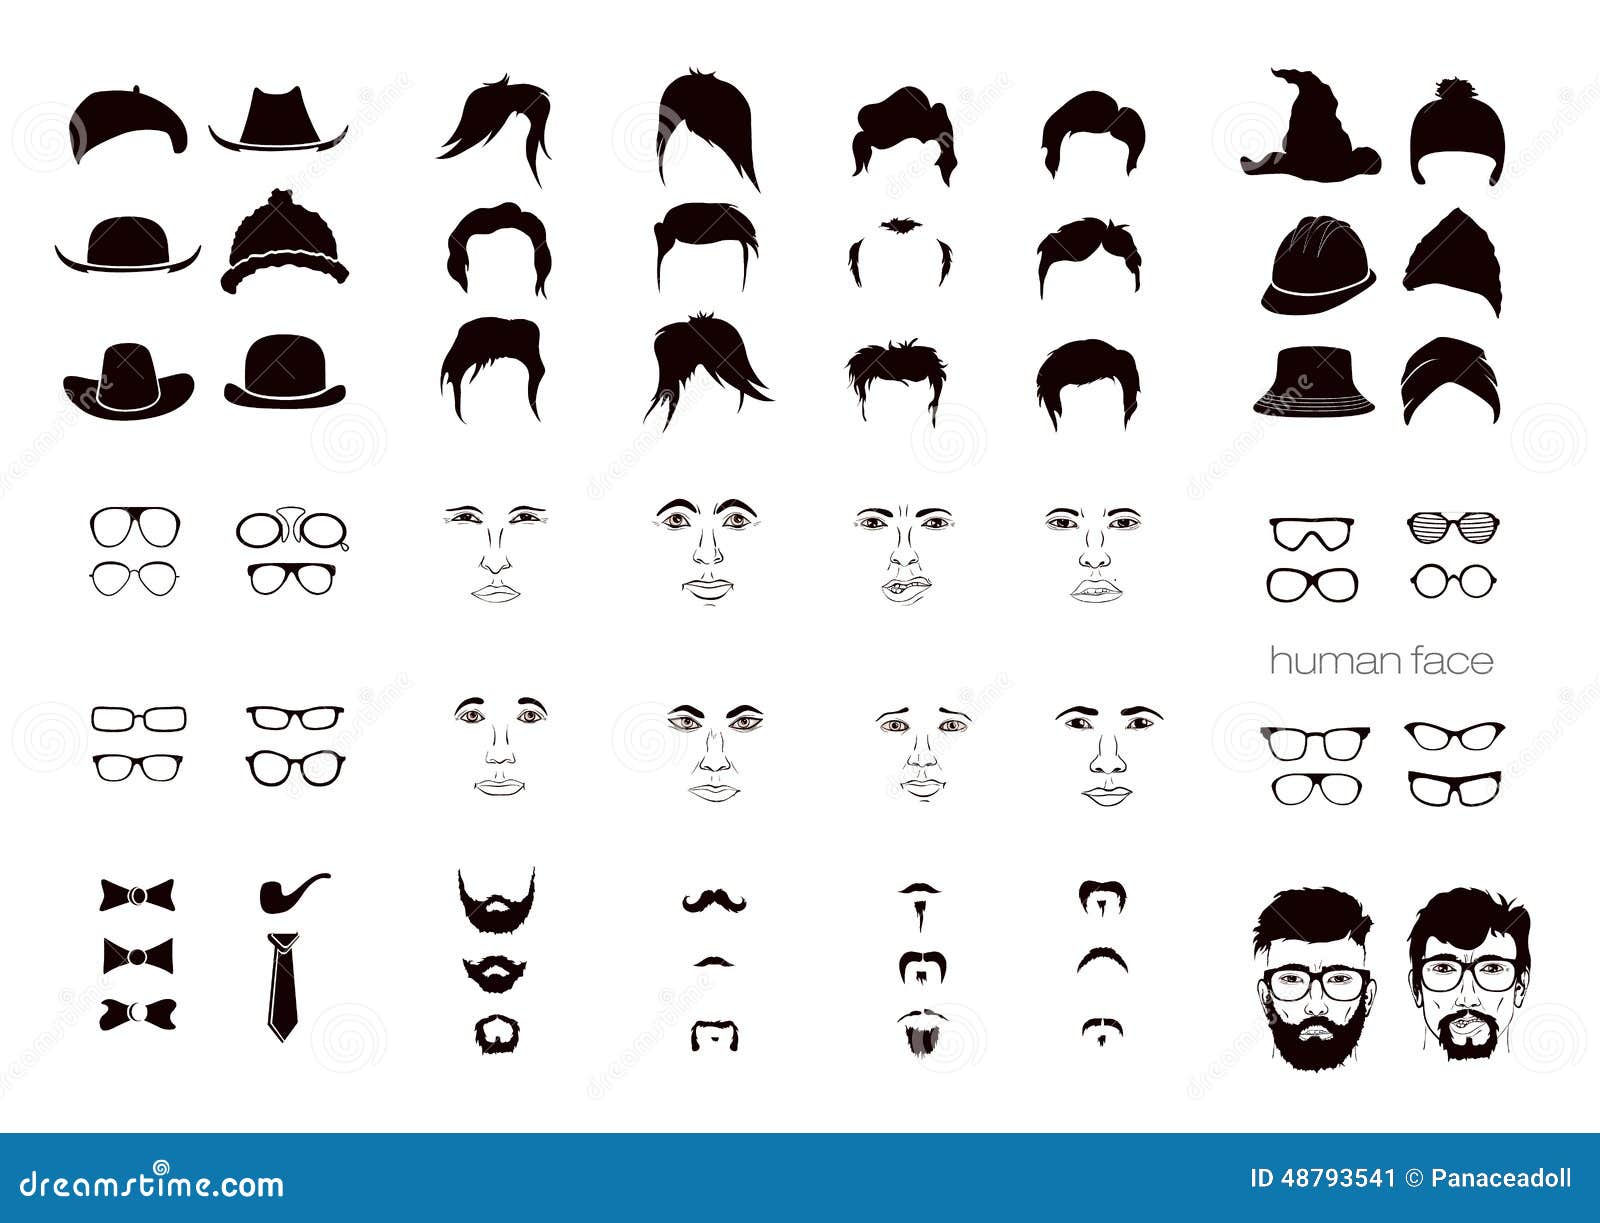 Elements Of A Person's Face Men Stock Vector - Image: 48793541